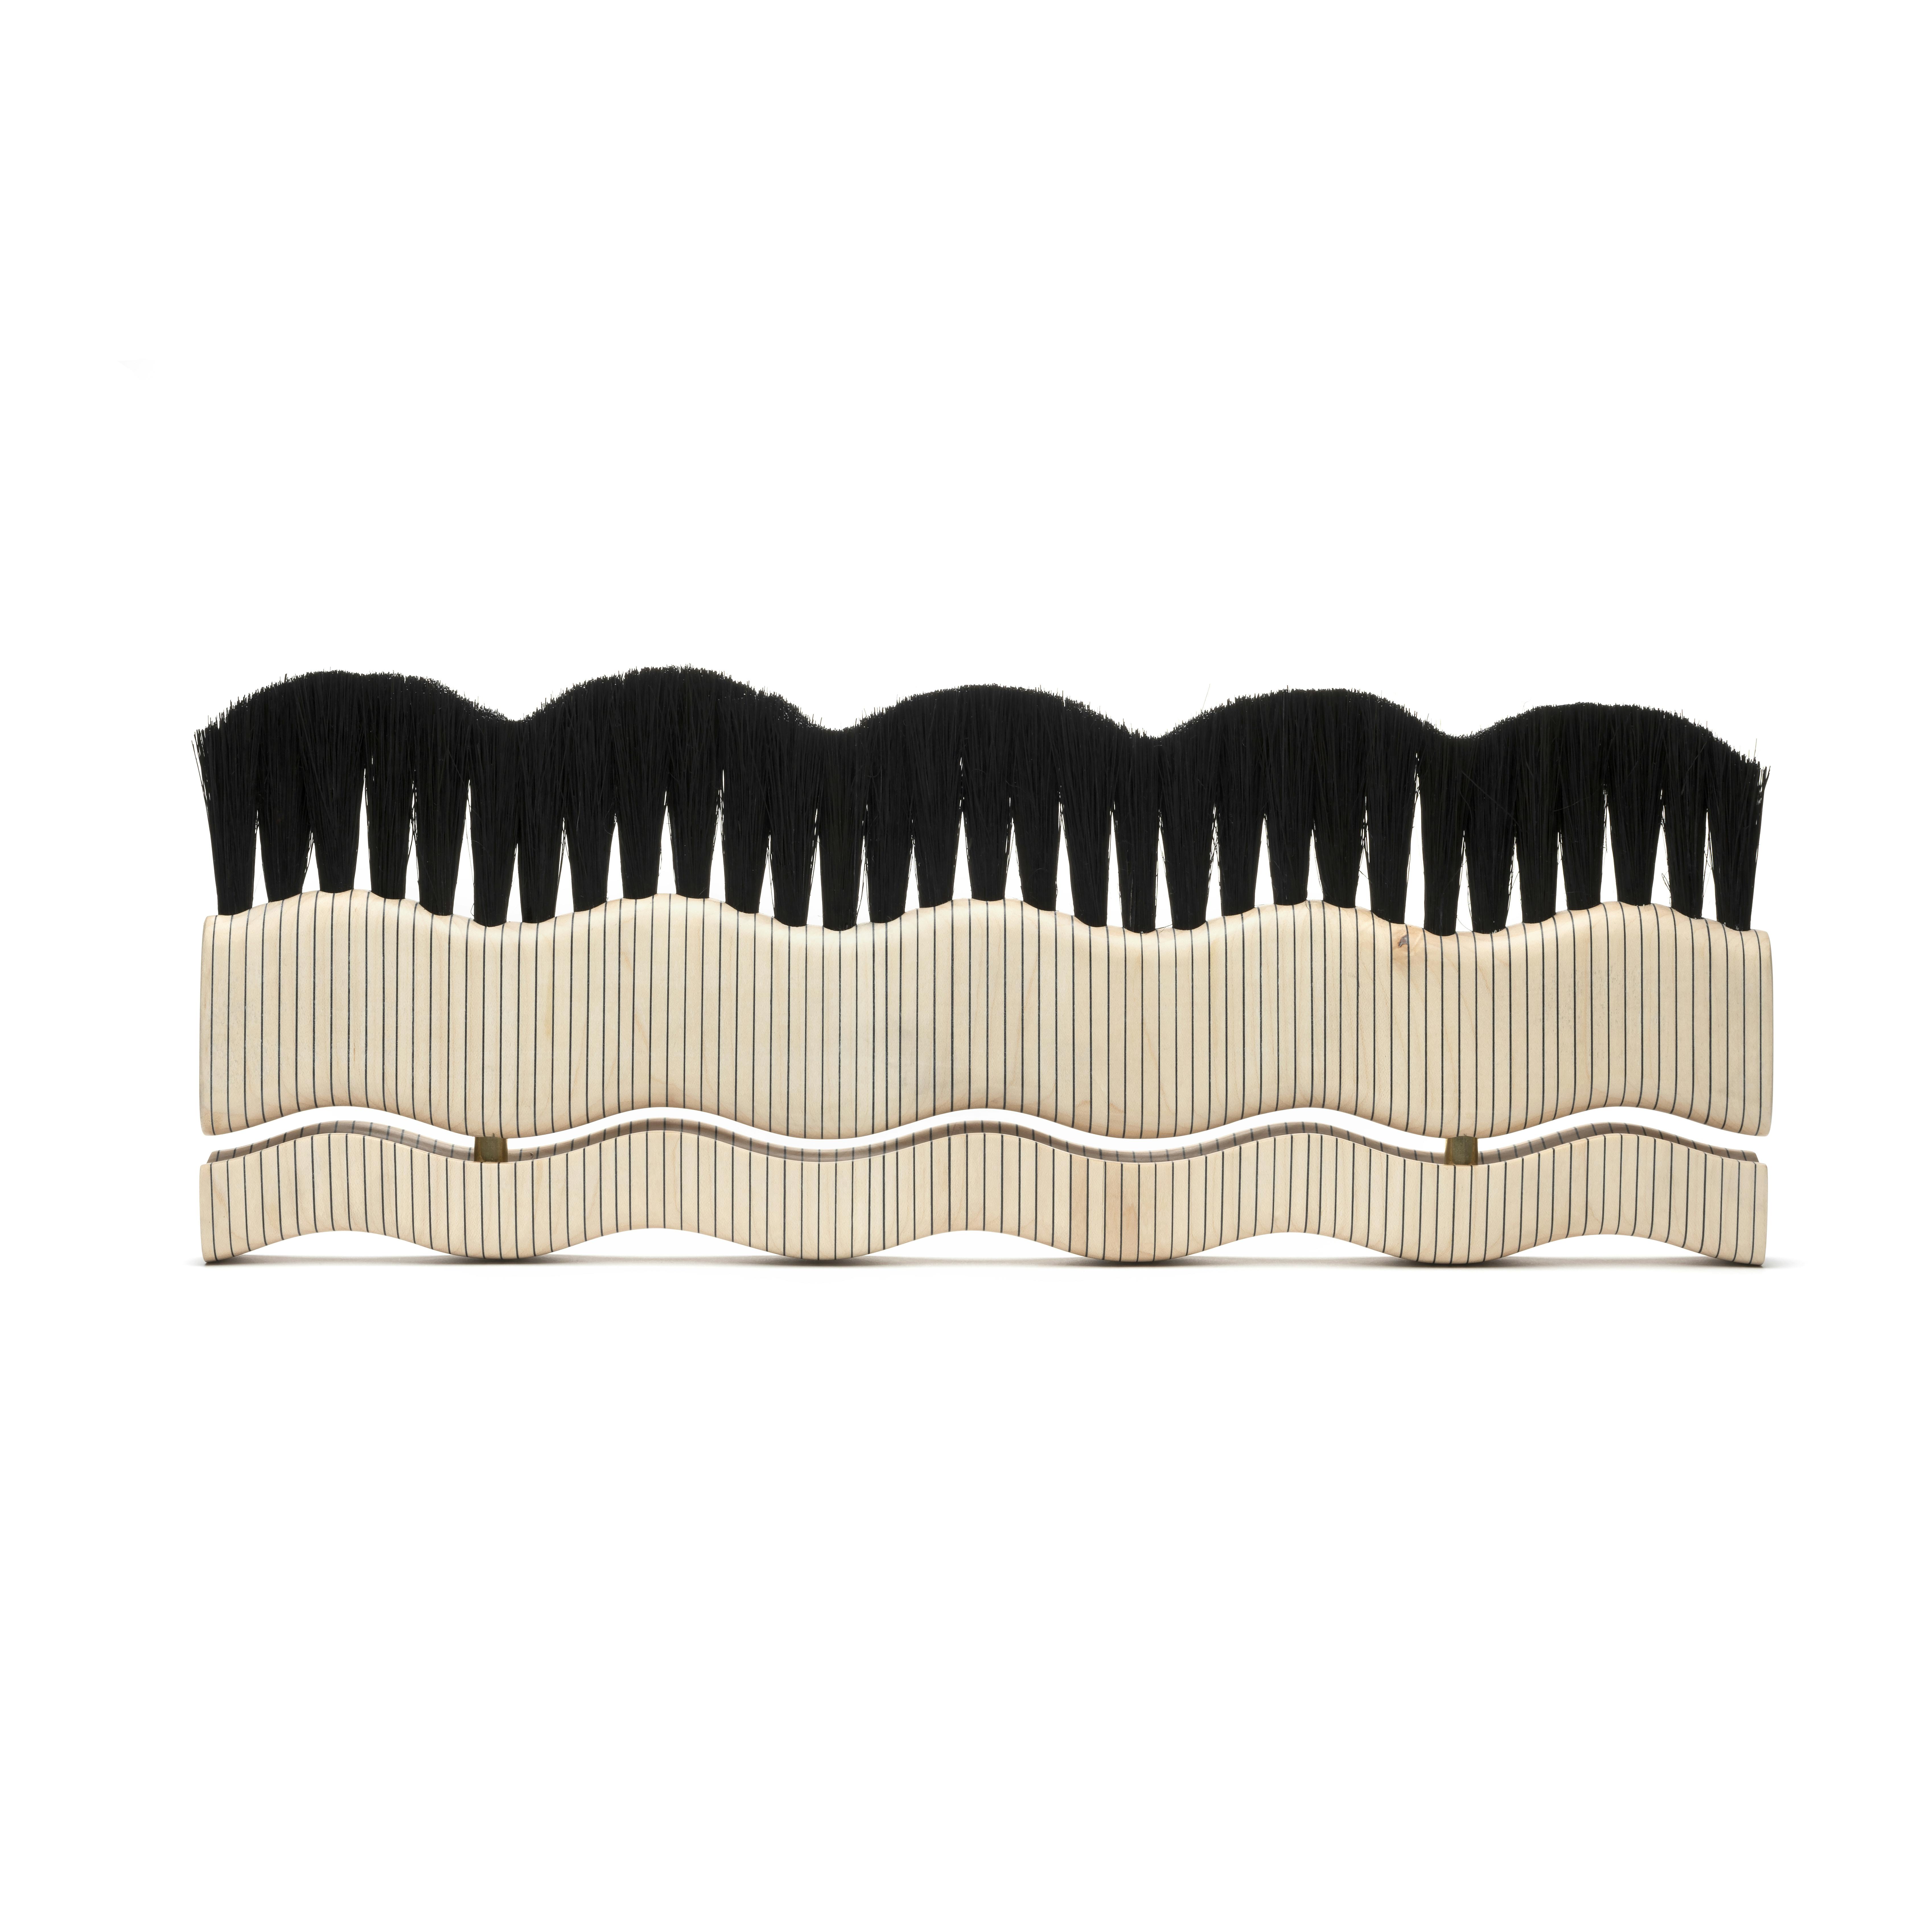 handmade brush with wide wavy shape with black bristles and wood handle